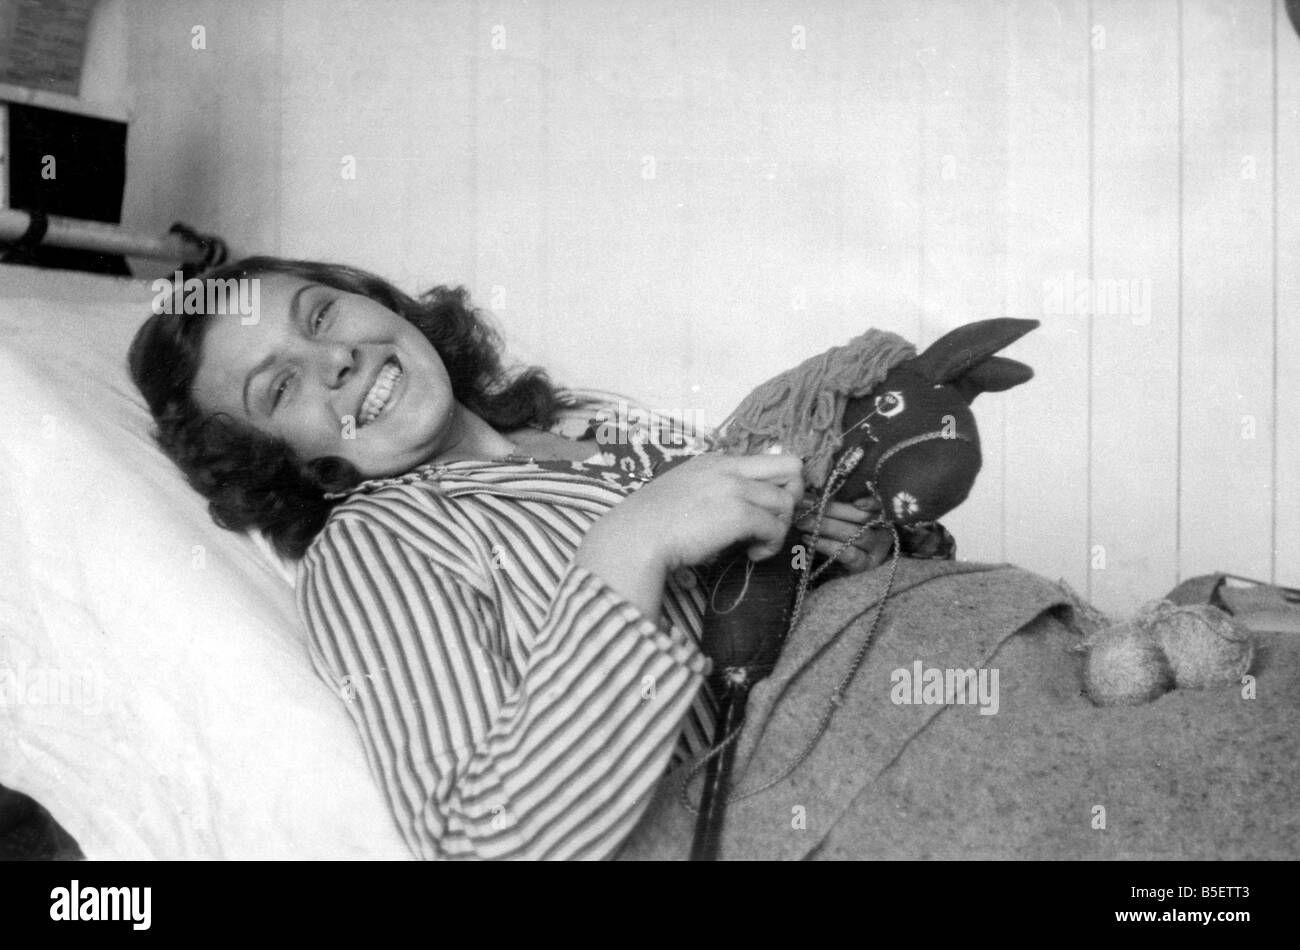 Teenager Susi Kstona who was brought to the Belsen concentration camp from Poland by the Nazis in 1943, now recovering in the Glyn Hughes hospital in Luneberg following the liberation of the camp by Allied forces. ;She is holding a toy horse that she made from old German uniforms and bits of wood;November 1945 Stock Photo